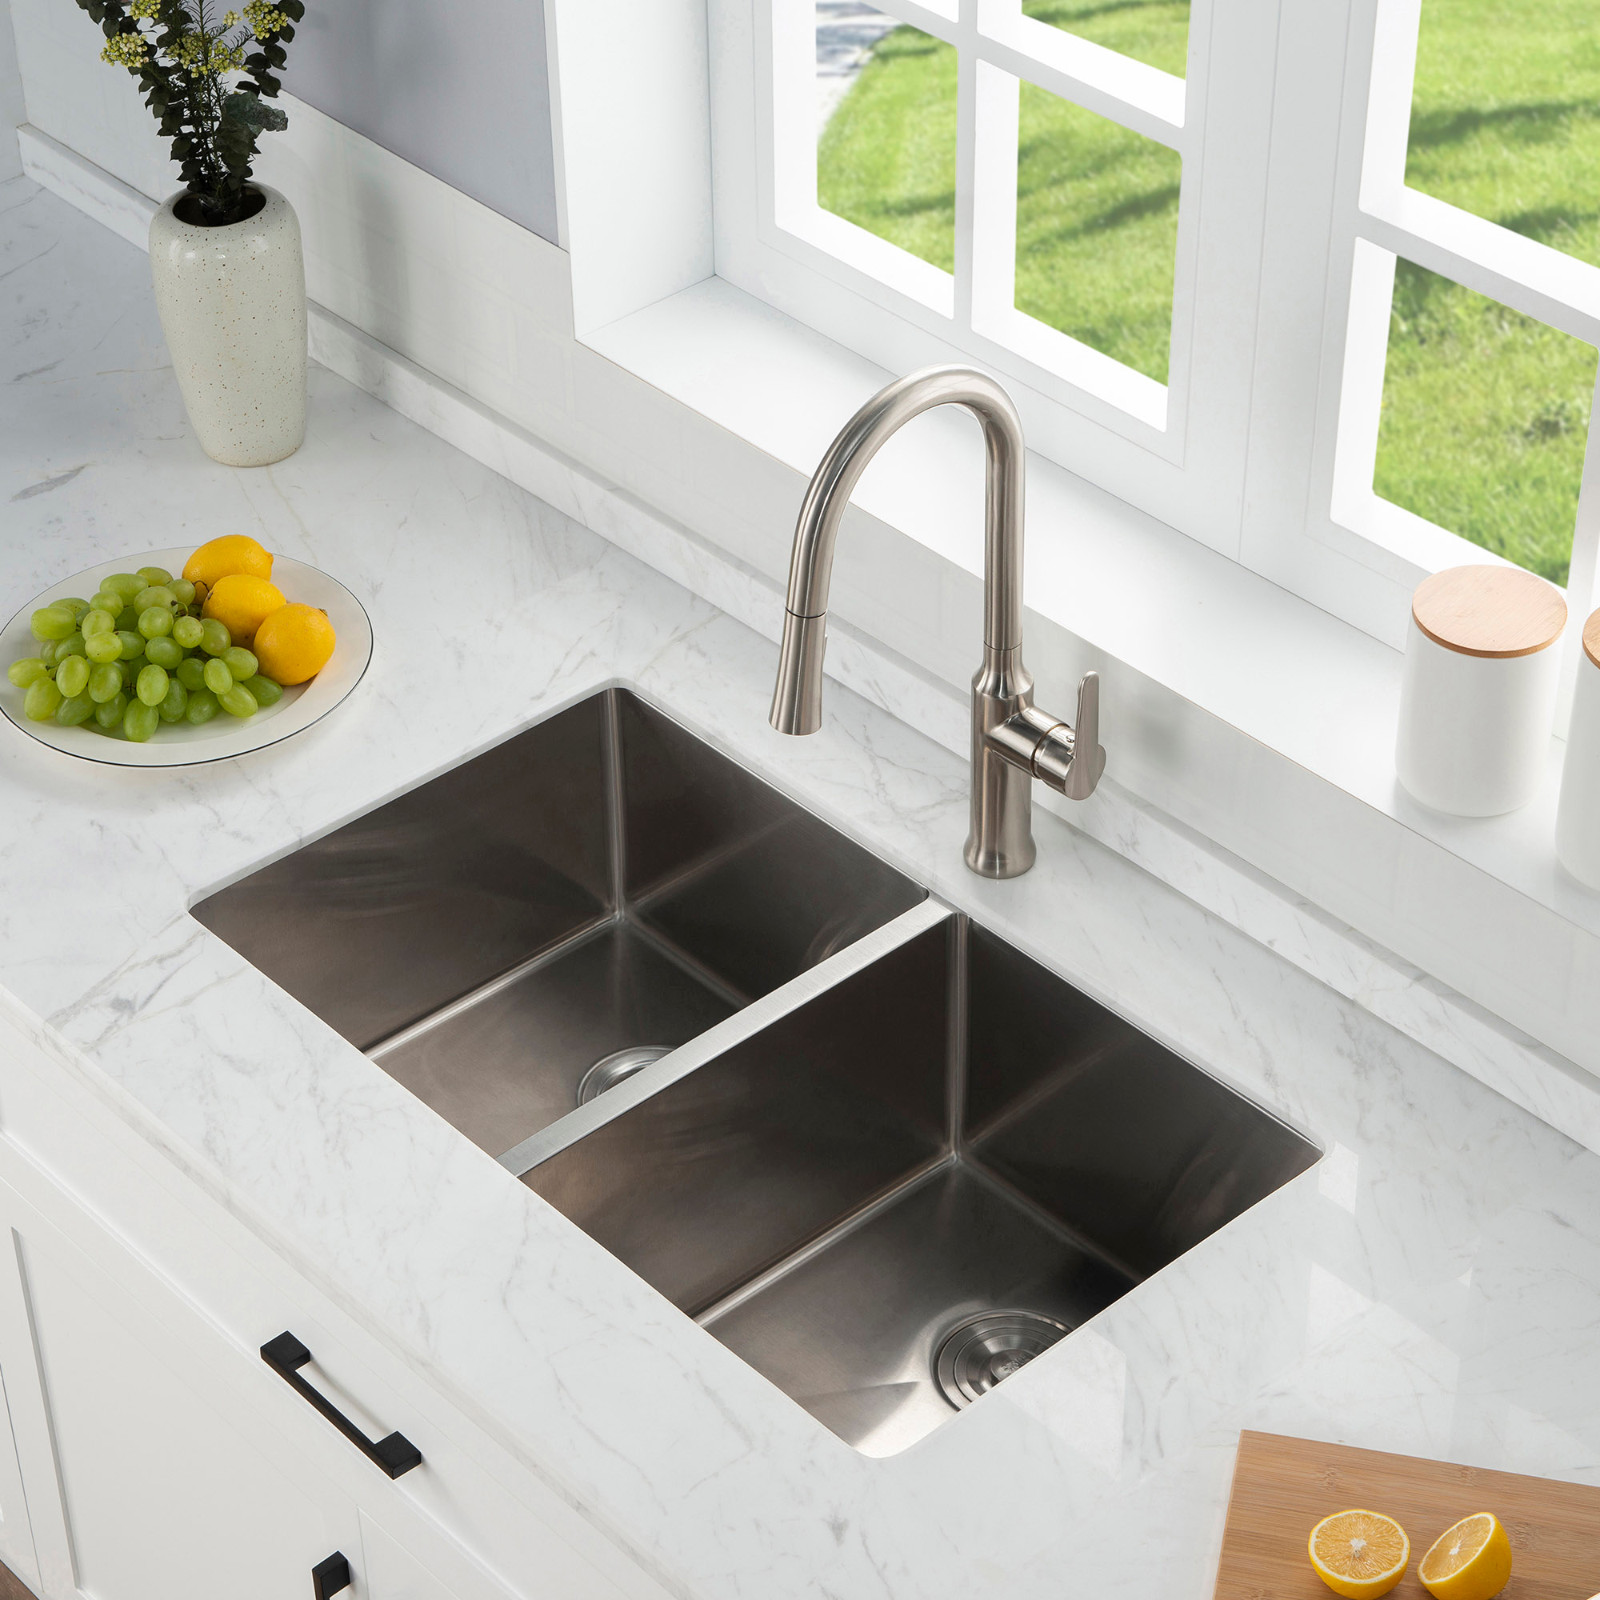  WOODBRIDGE WK030102BN Stainless Steel Single Handle Pre-Rinse Kitchen Faucet with Pull Down Sprayer, Brushed Nickel Finish_9420